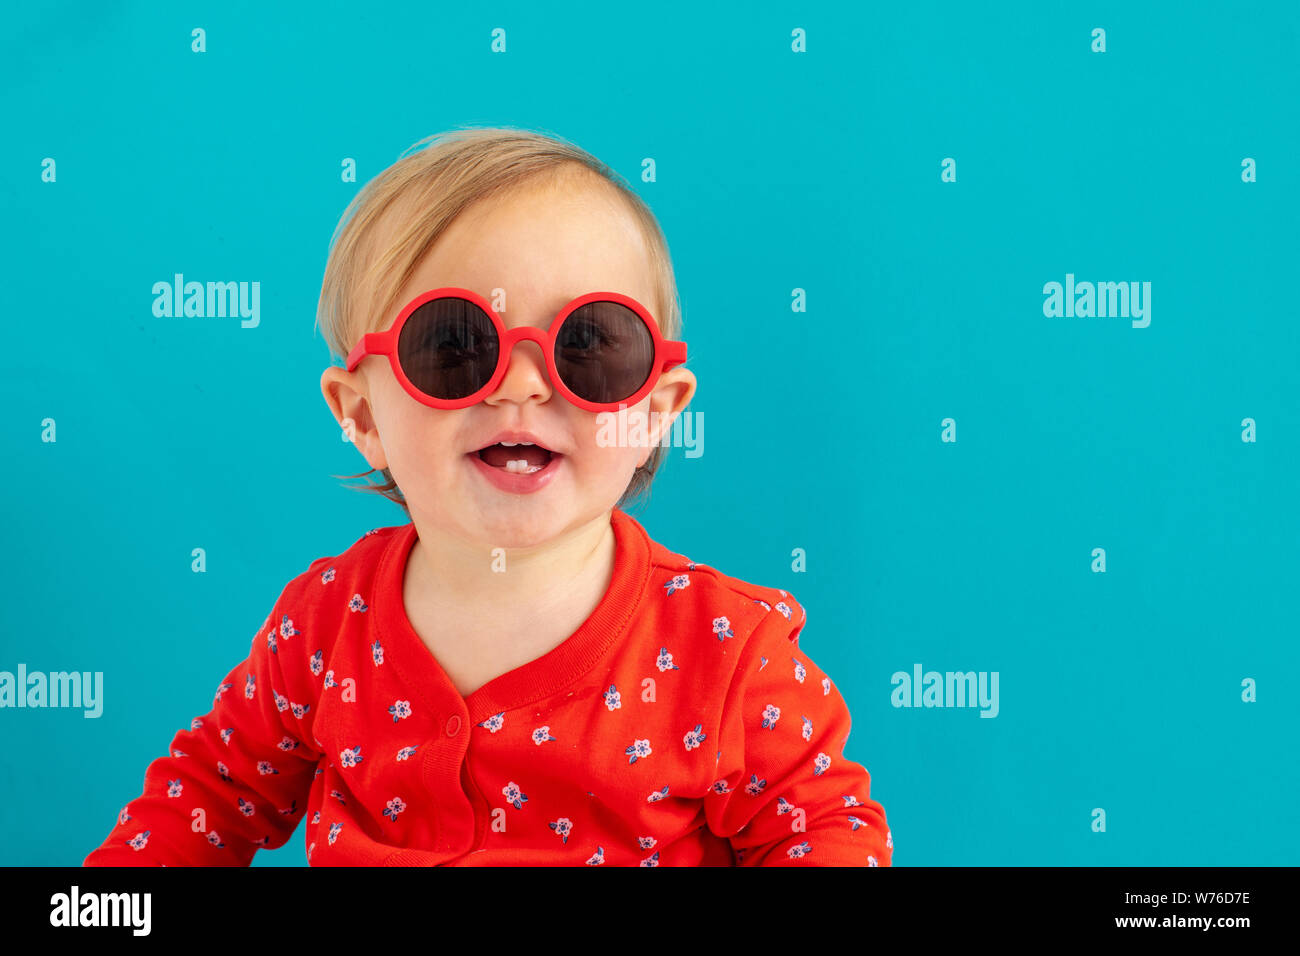 Cute baby in red sunglasses smile Stock Photo